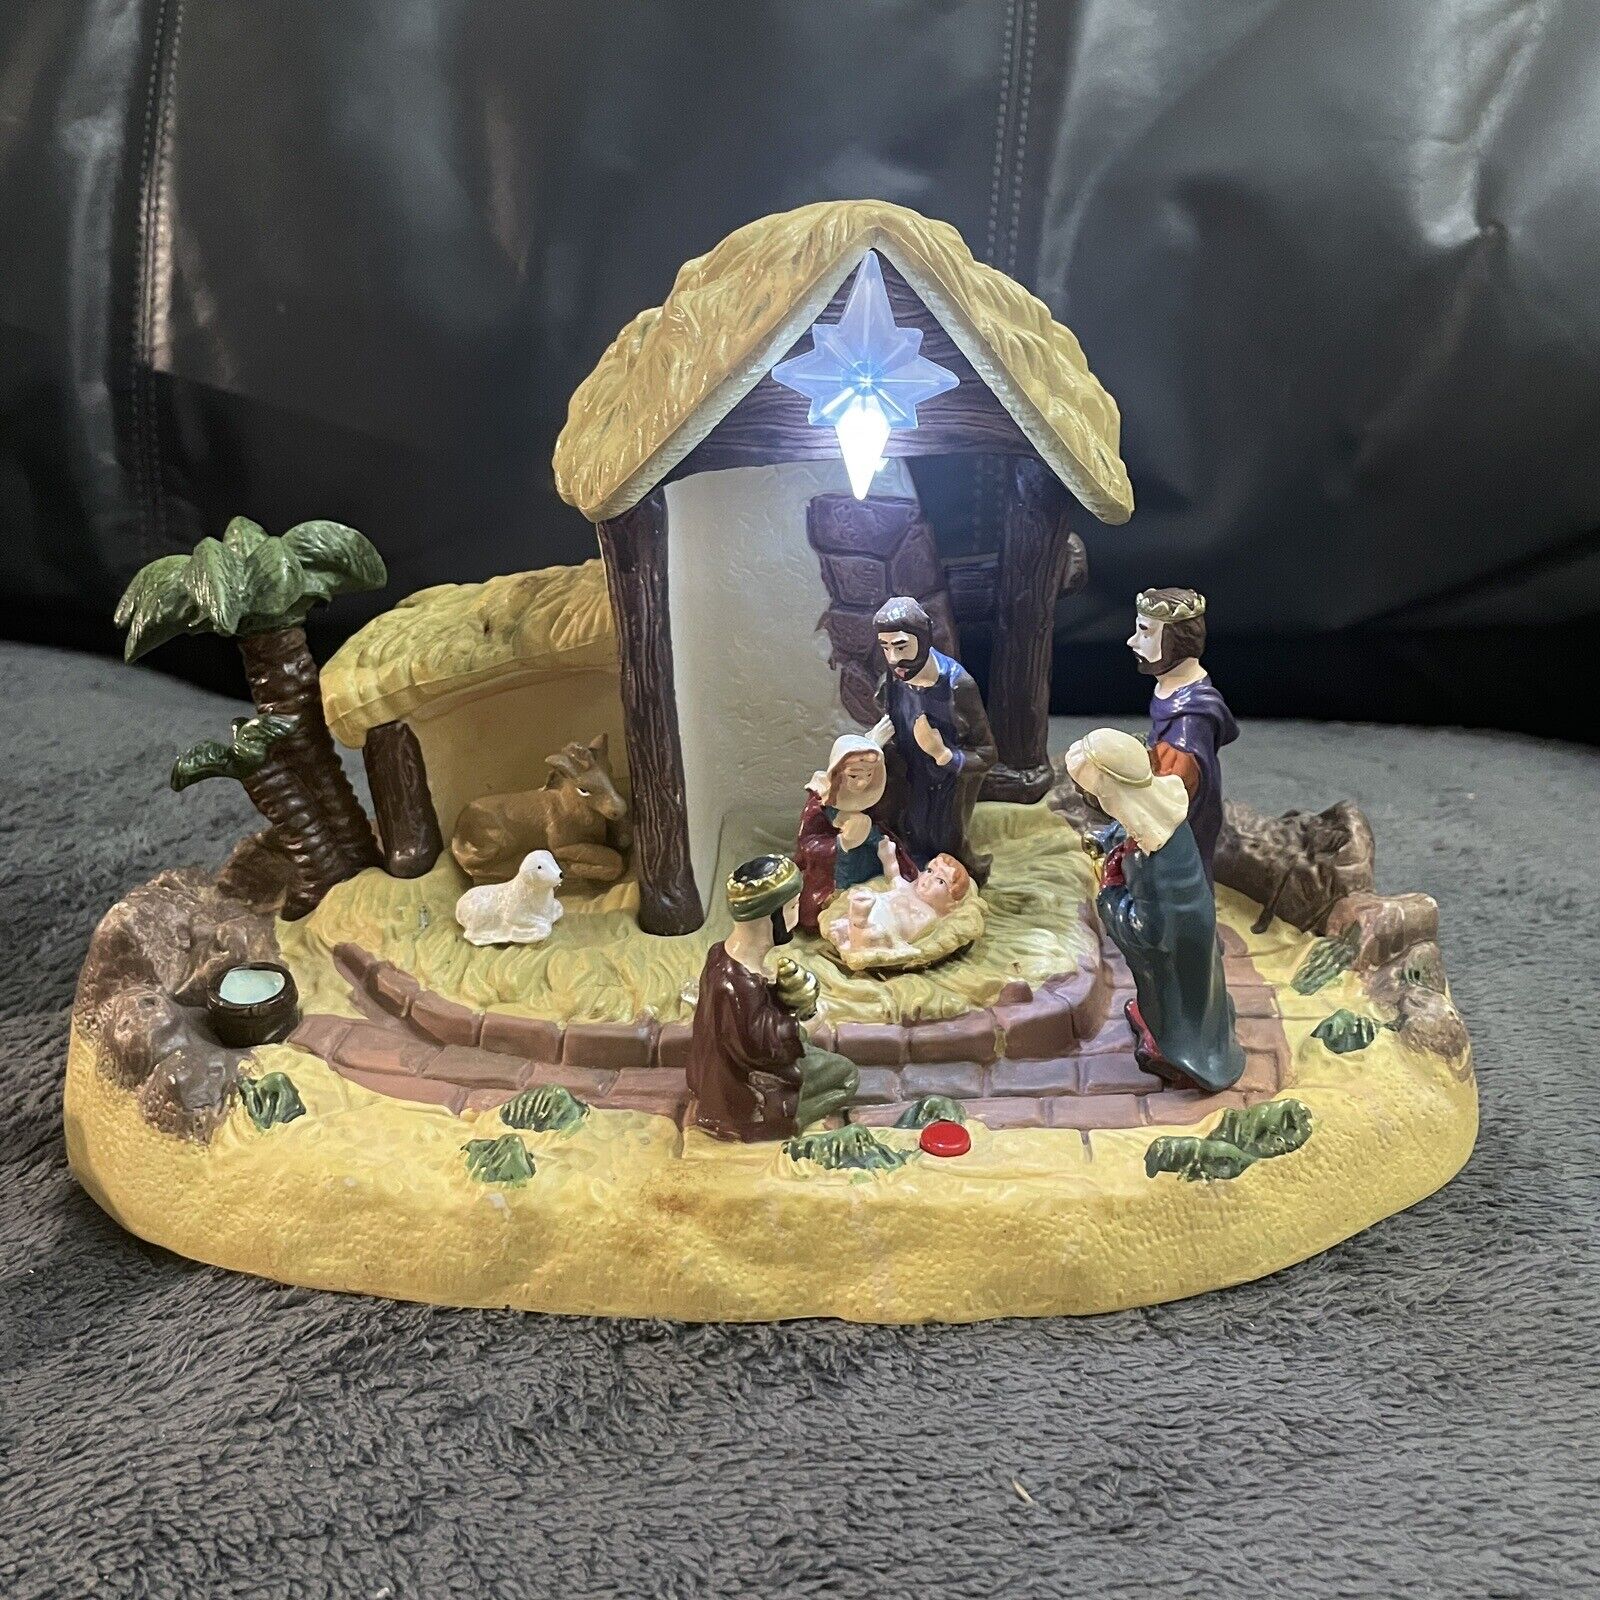 Nativity Scene LIghts-Up Musical Narrated Story Birth of Jesus by Gemmy Video